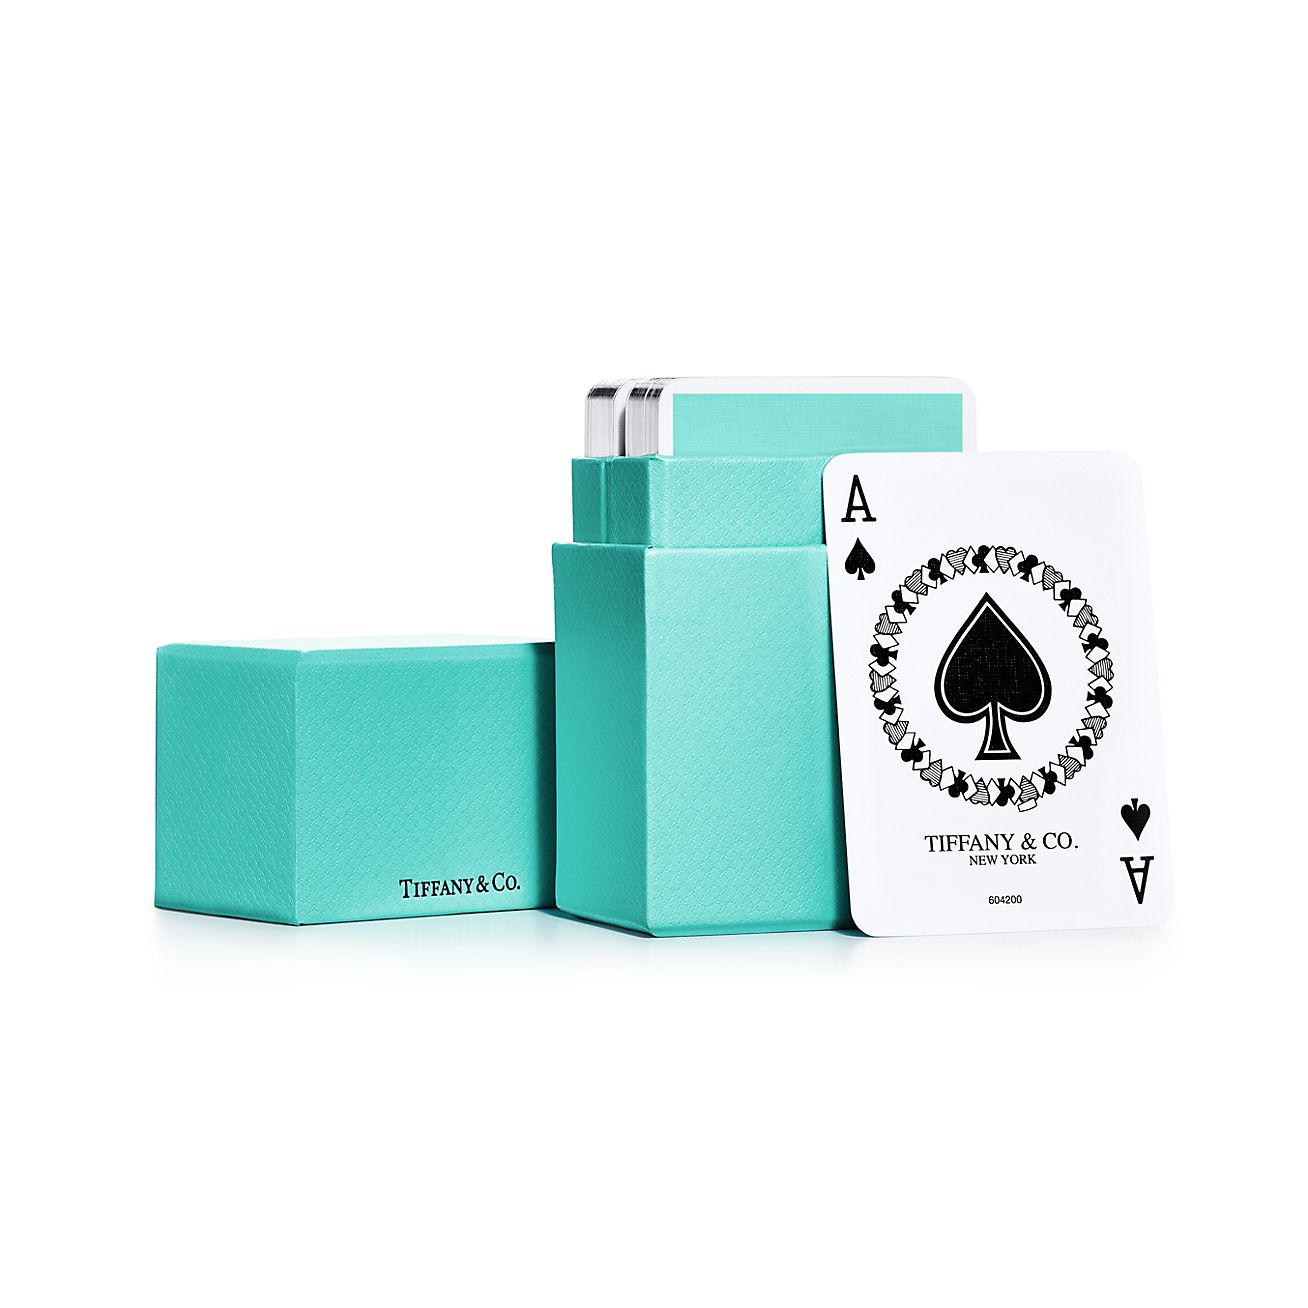 tiffany and co playing cards